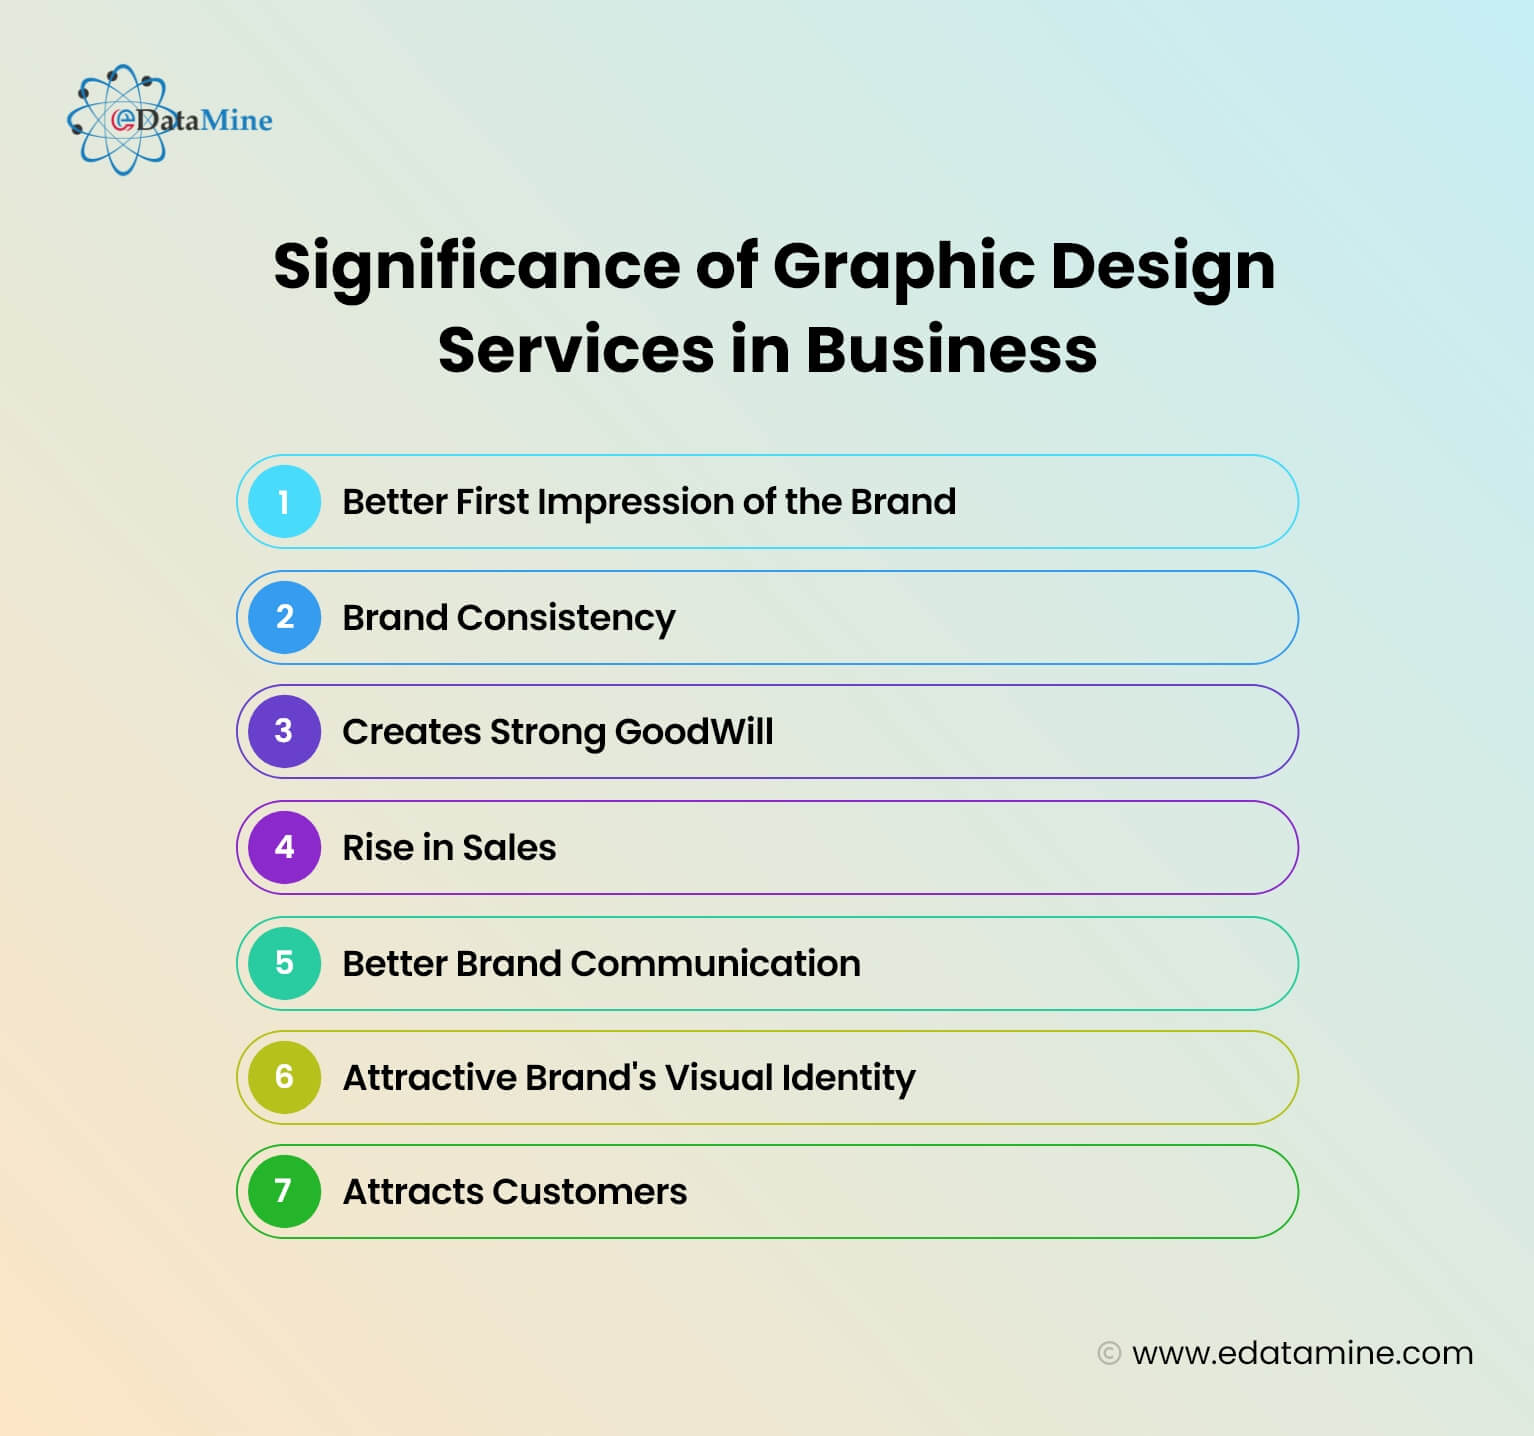 Significance of Graphic Design Services in Business